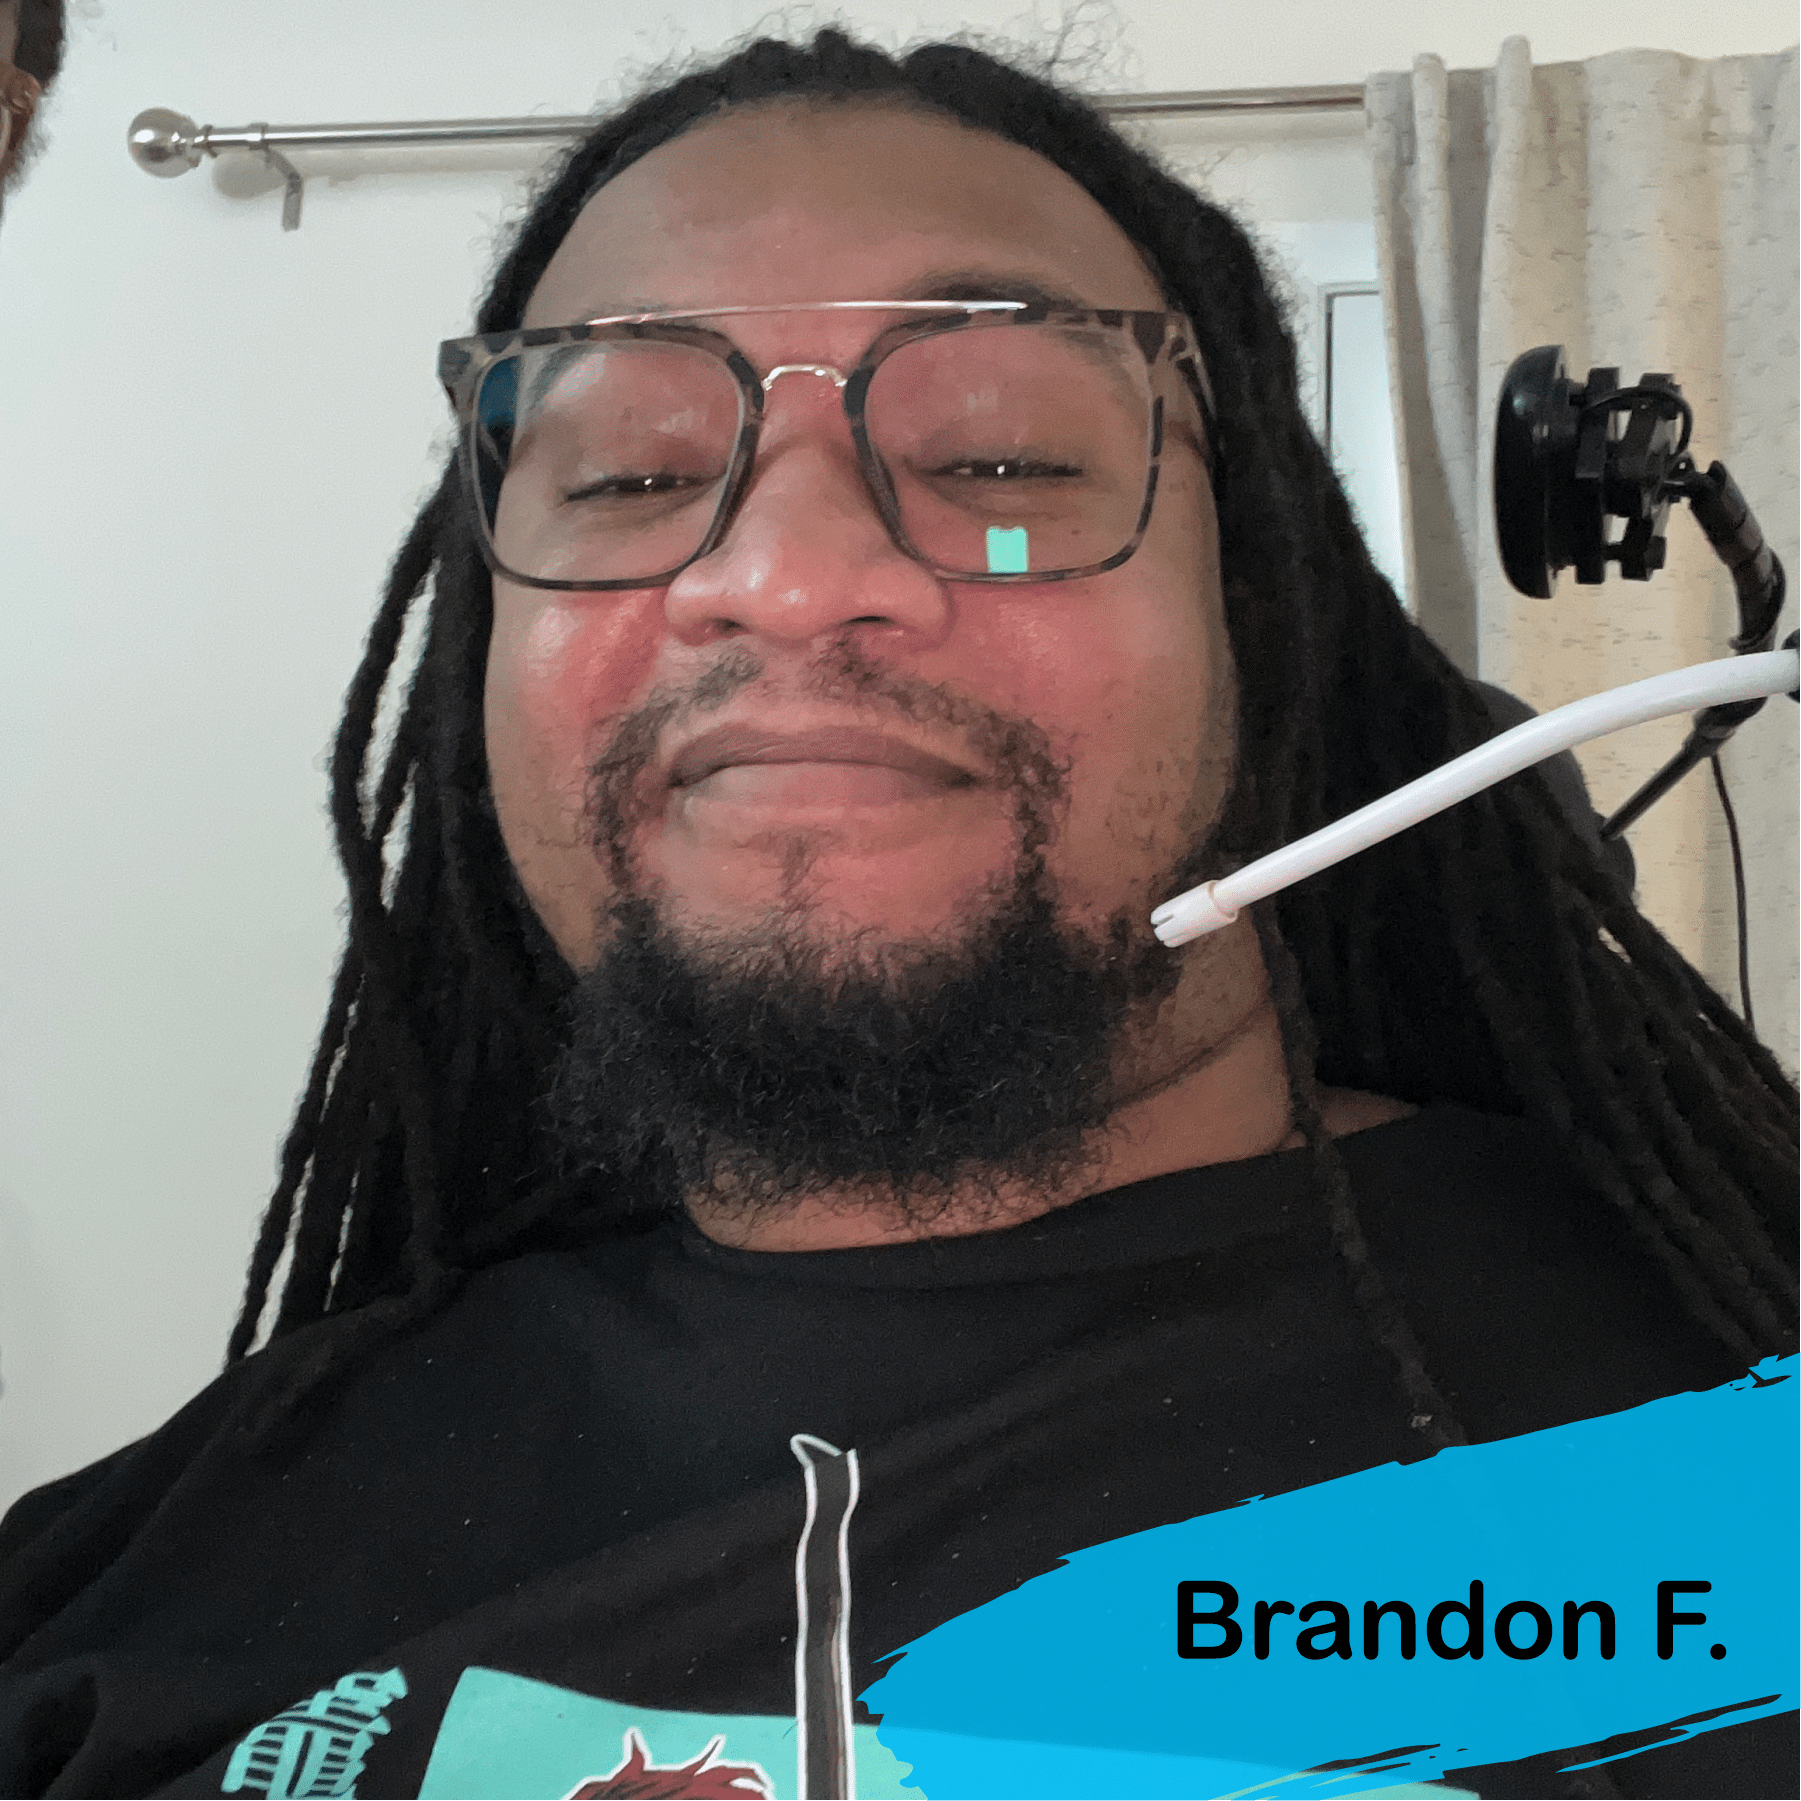 A photo of Brandon, a young man, he has black hair and a beard and he is wearing glasses